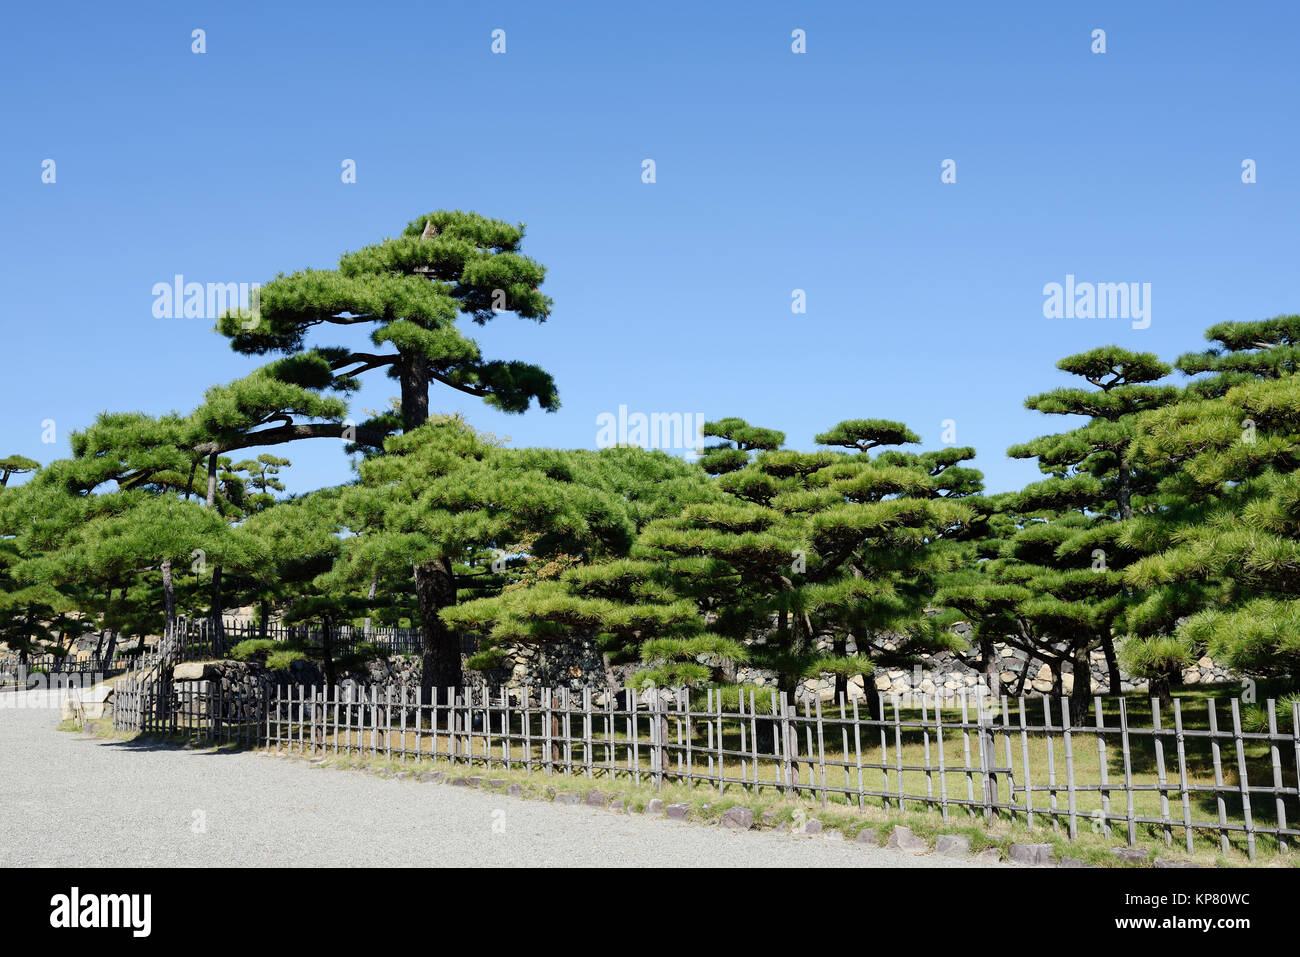 Peaceful Japanese garden with pine trees Stock Photo